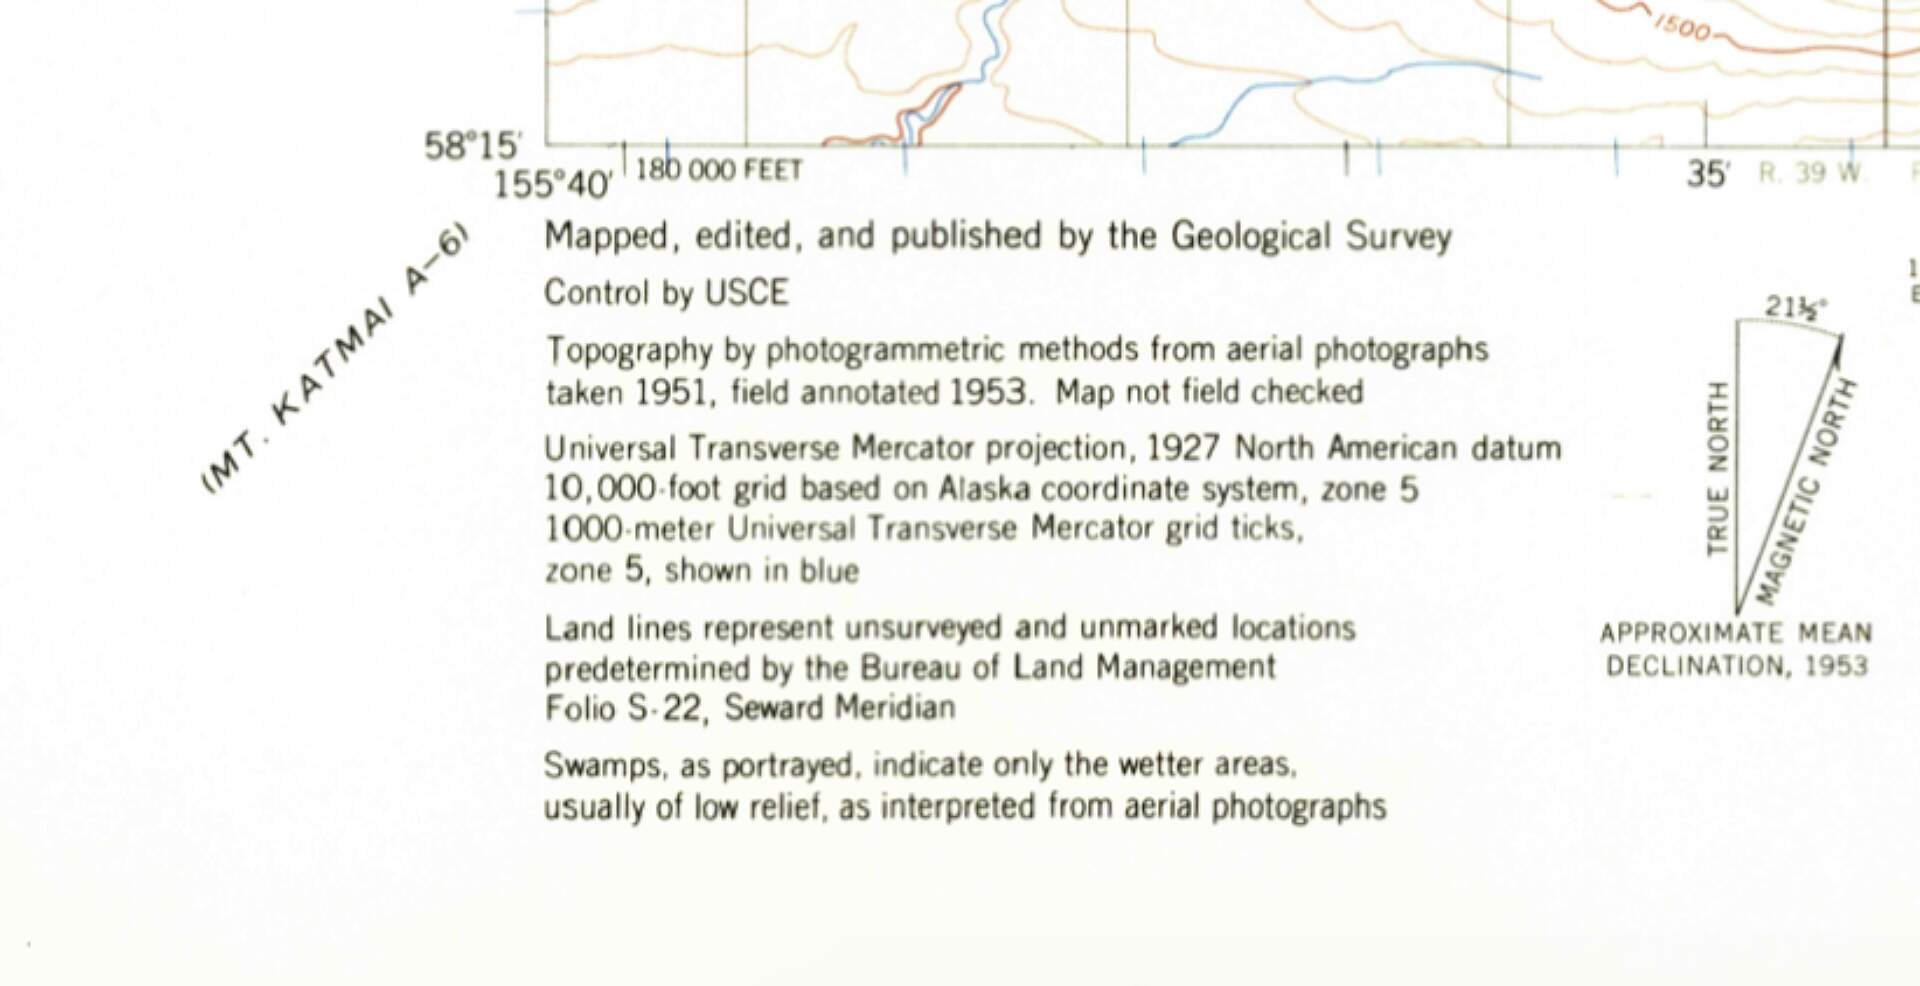 Haley Johnston AC Image Backcountry Navigation Declination and Date of Creation Revision